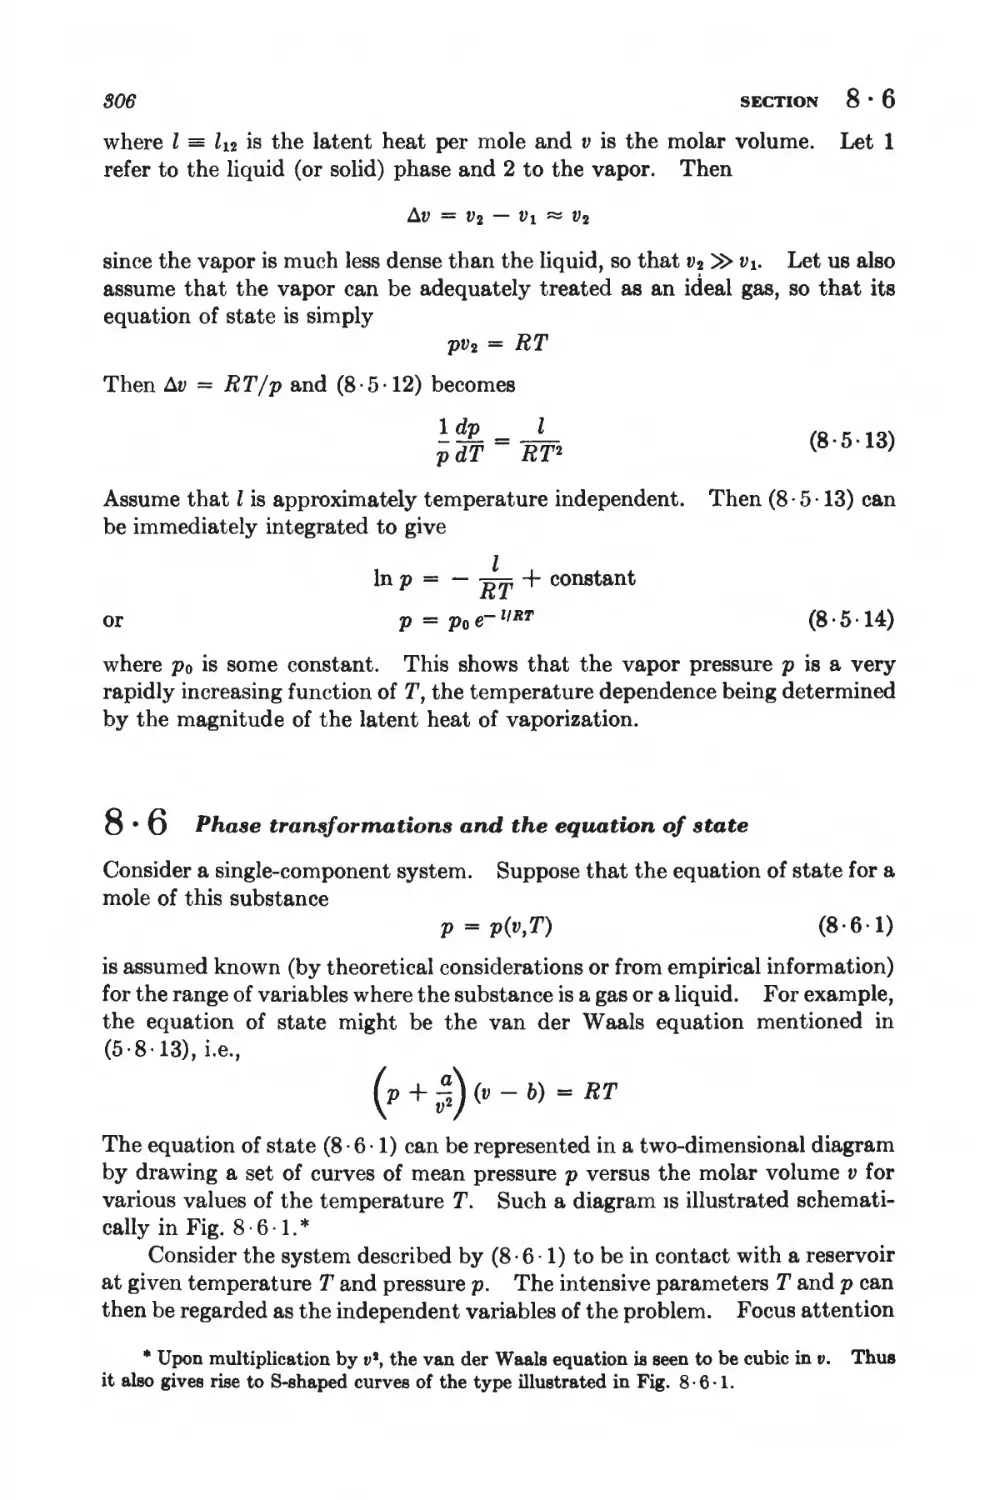 8.6 Phase transformations and the equation of state